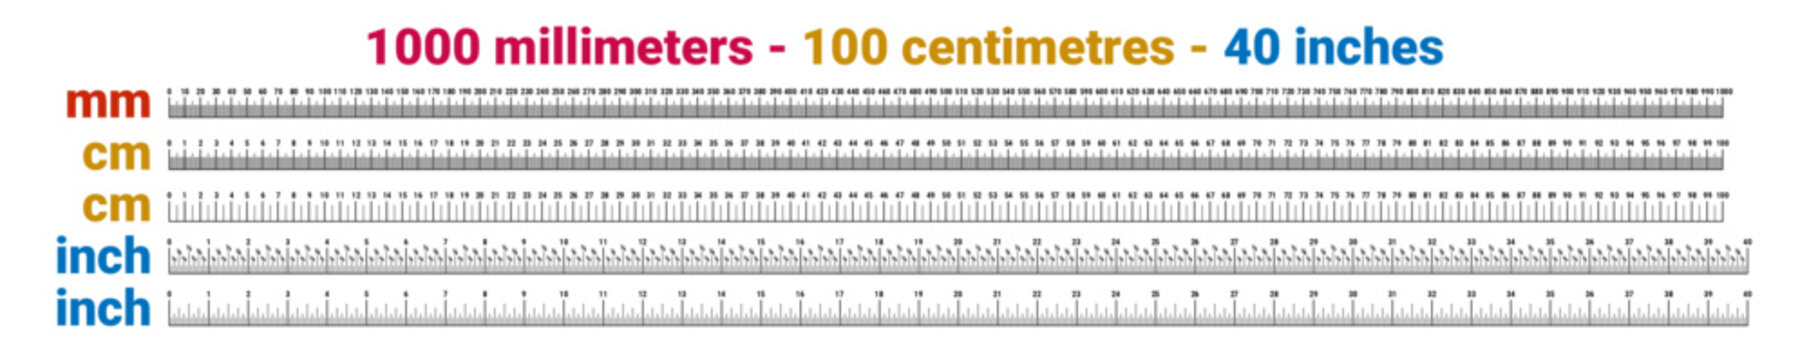 Actual size rulers, 1000 millimeters, 100 centimeters and 40 inches. Editable text and strokes